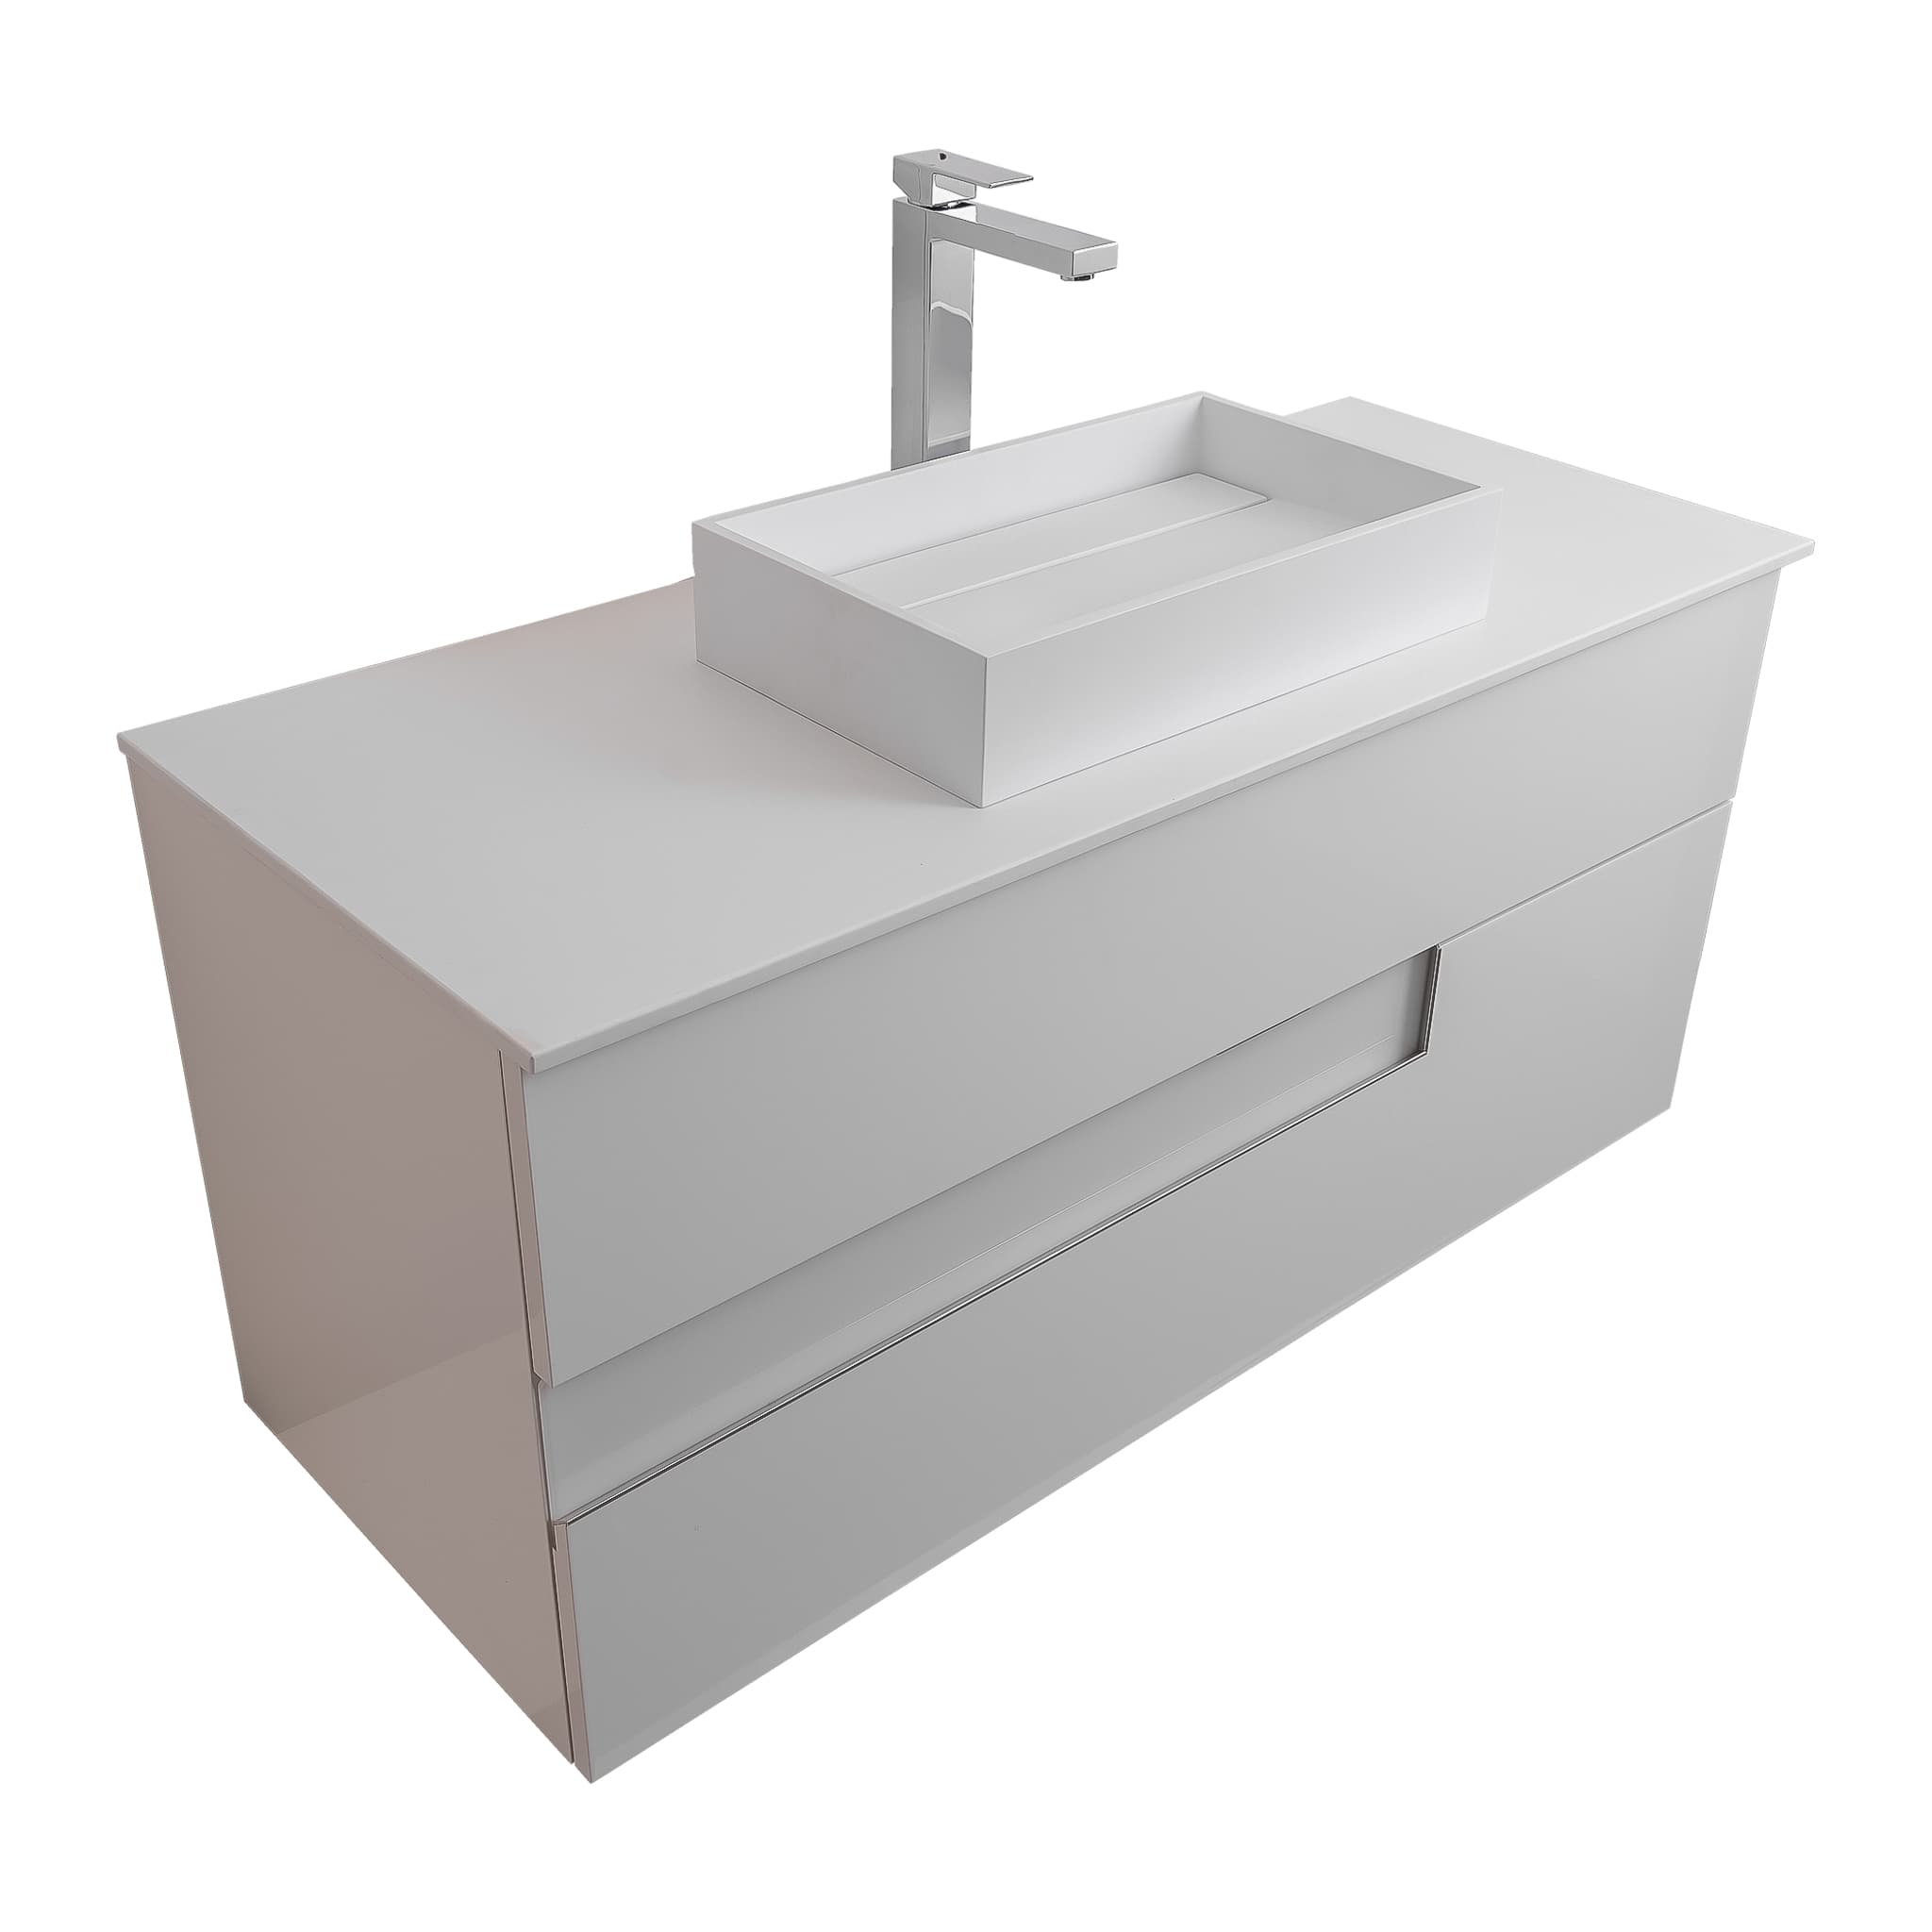 Vision 47.5 White High Gloss Cabinet, Solid Surface Flat White Counter And Infinity Square Solid Surface White Basin 1329, Wall Mounted Modern Vanity Set